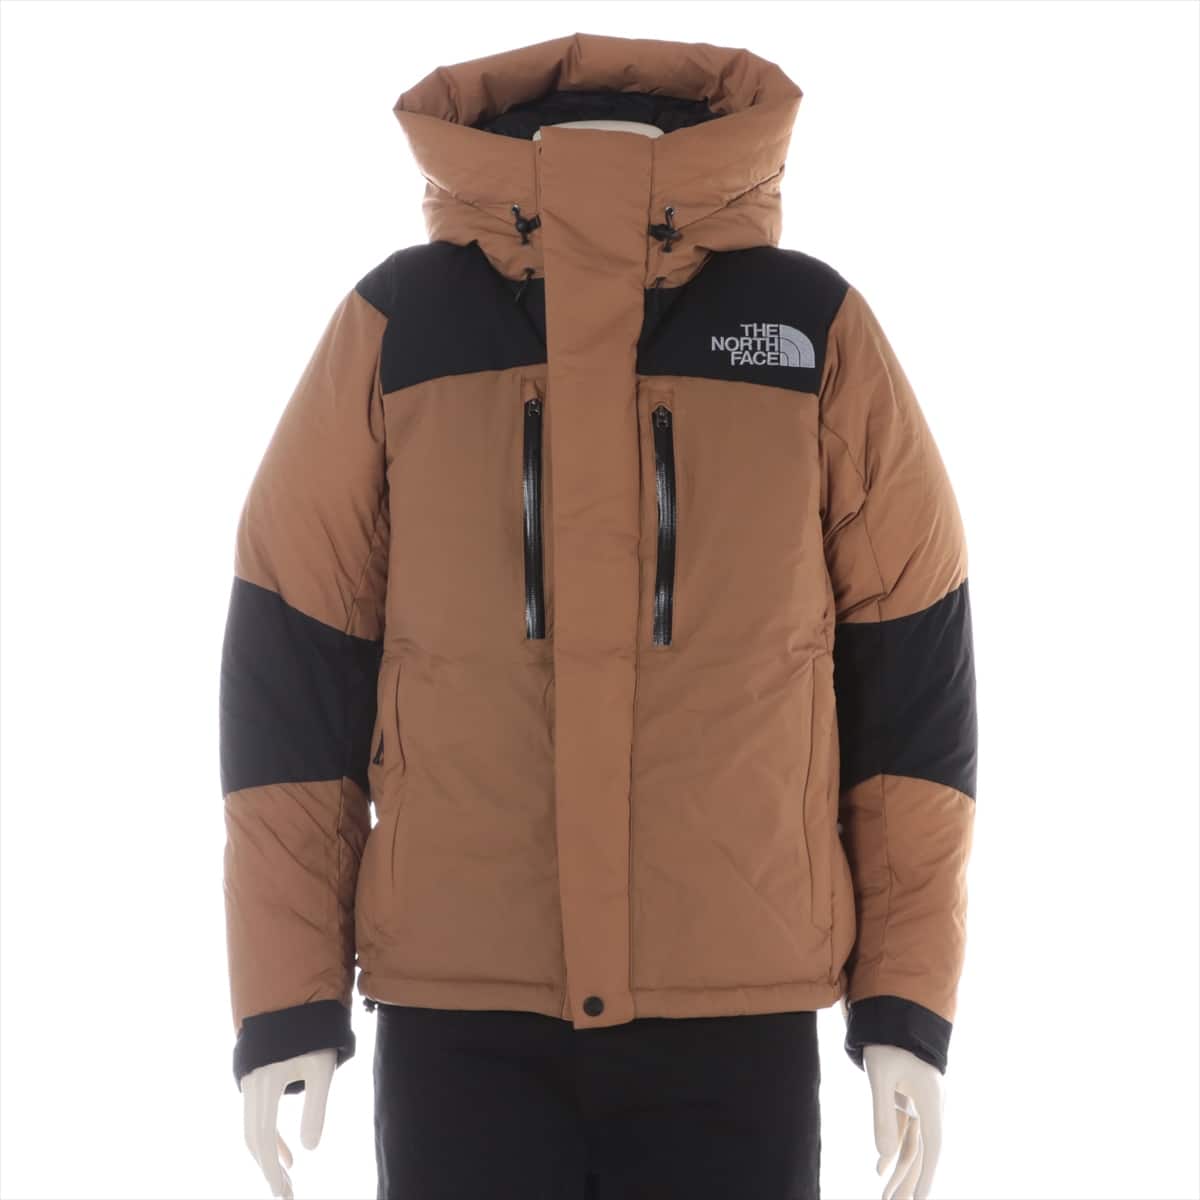 The North Face Nylon Down jacket M Men's Brown  ND91950 BALTRO LIGHT JACKET Comes with storage bag